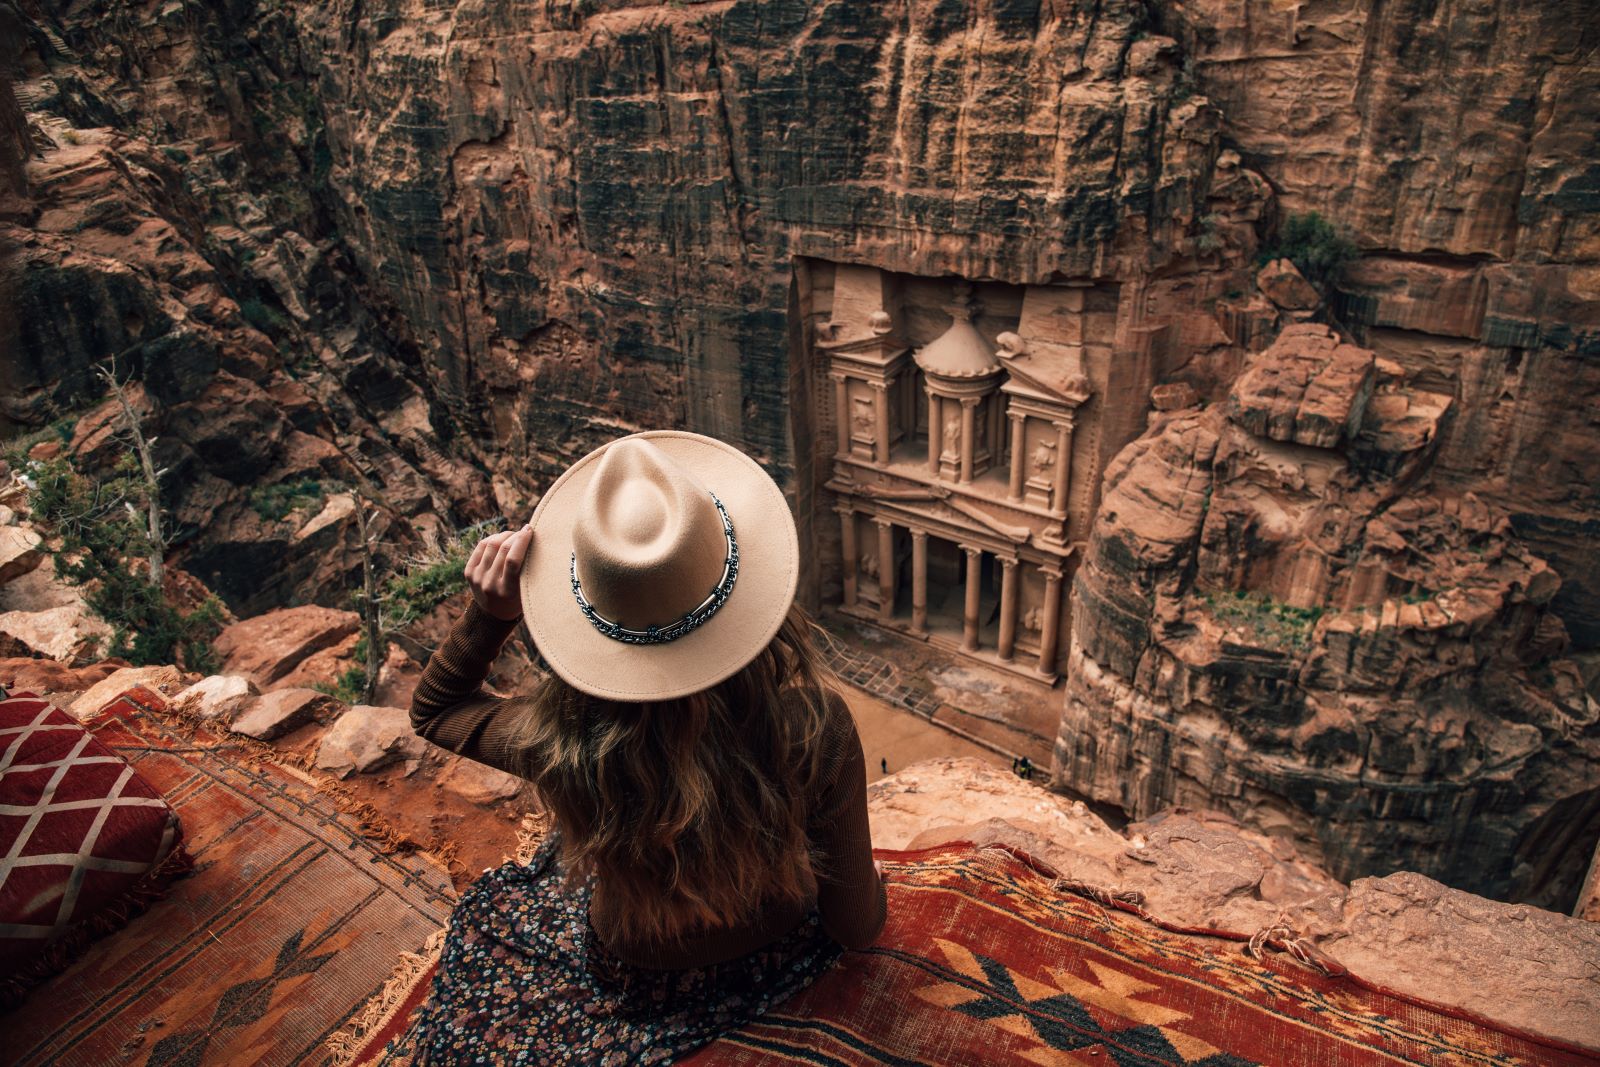 <p class="wp-caption-text">Image Credit: Shutterstock / Bryan Blaes</p>  <p><span>Petra, the ancient Nabatean city carved into the rose-red cliffs of southern Jordan, is one of the world’s most iconic archaeological sites. Exploring Petra is like stepping back in time, with the opportunity to wander through a lost city once a thriving trade center. The journey through the Siq to the Treasury is just the beginning, as the site encompasses royal tombs, ancient temples, and breathtaking viewpoints. Beyond its archaeological wonders, Petra offers a glimpse into the Bedouin culture and the opportunity to explore the surrounding desert landscapes of Wadi Rum.</span></p>